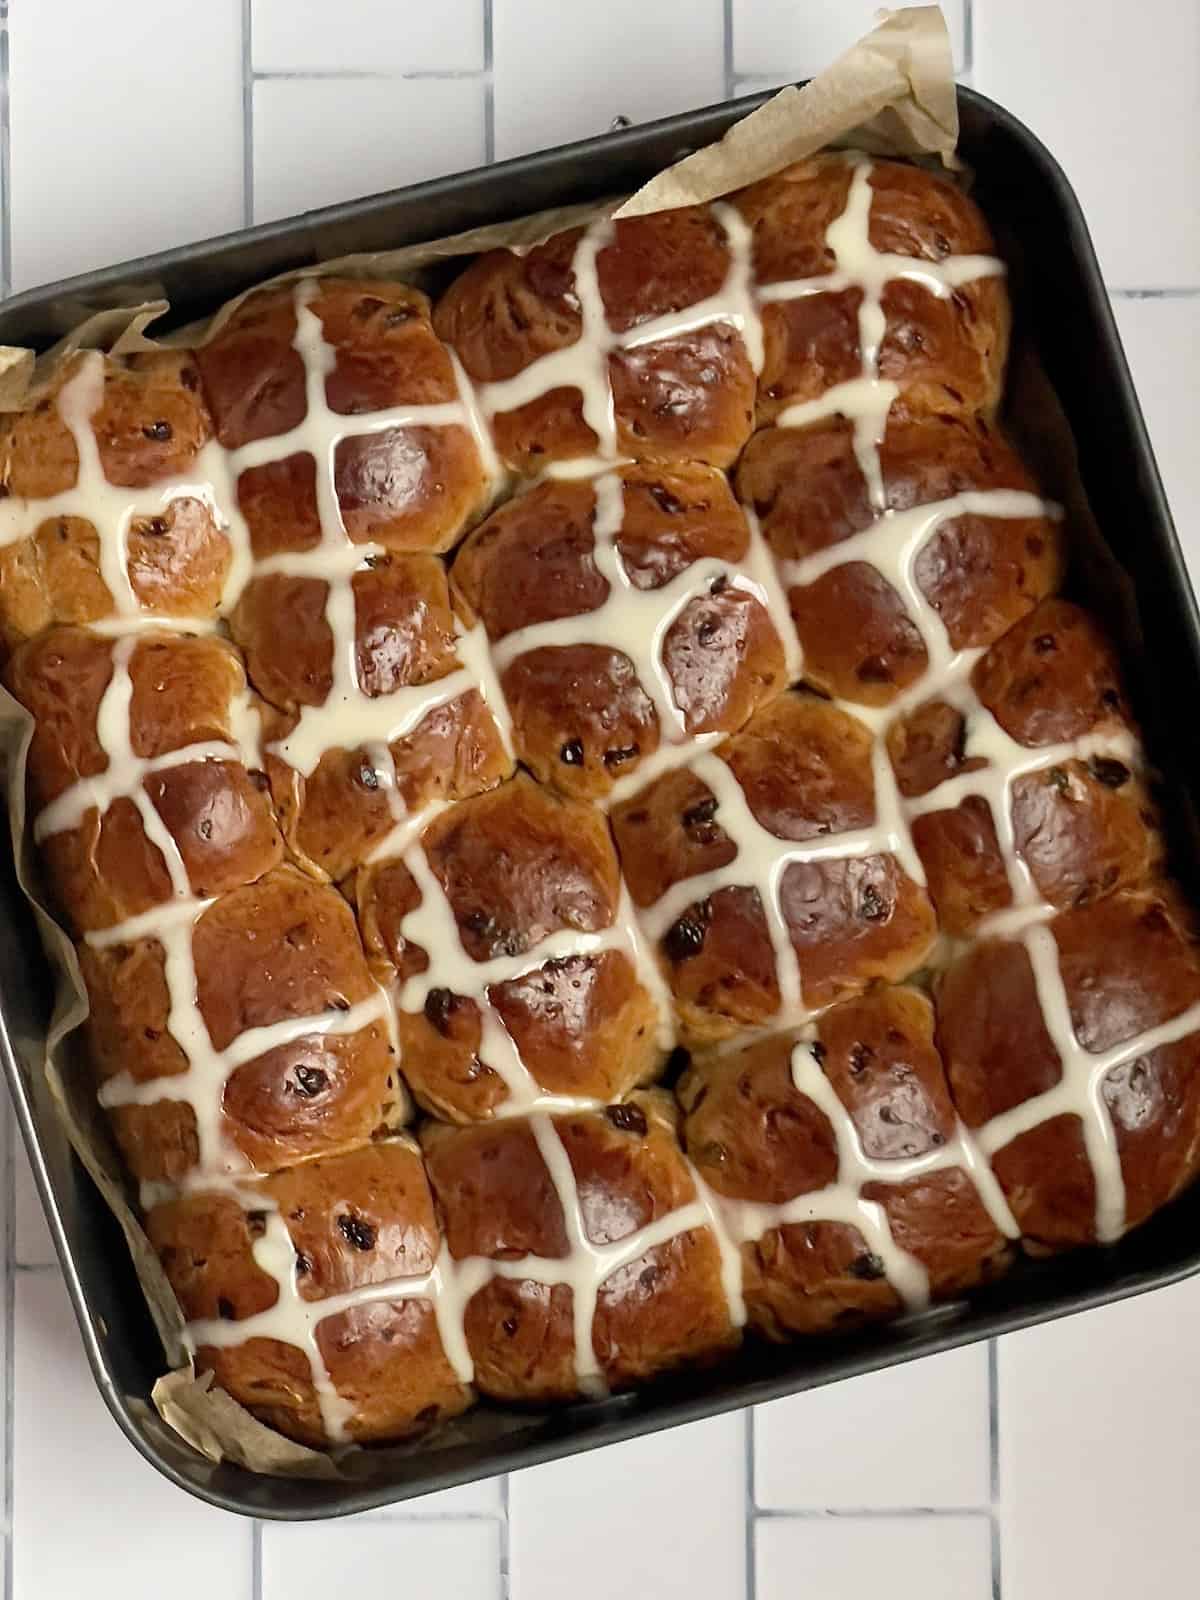 icing crosses drizzled over hot cross buns in a pan